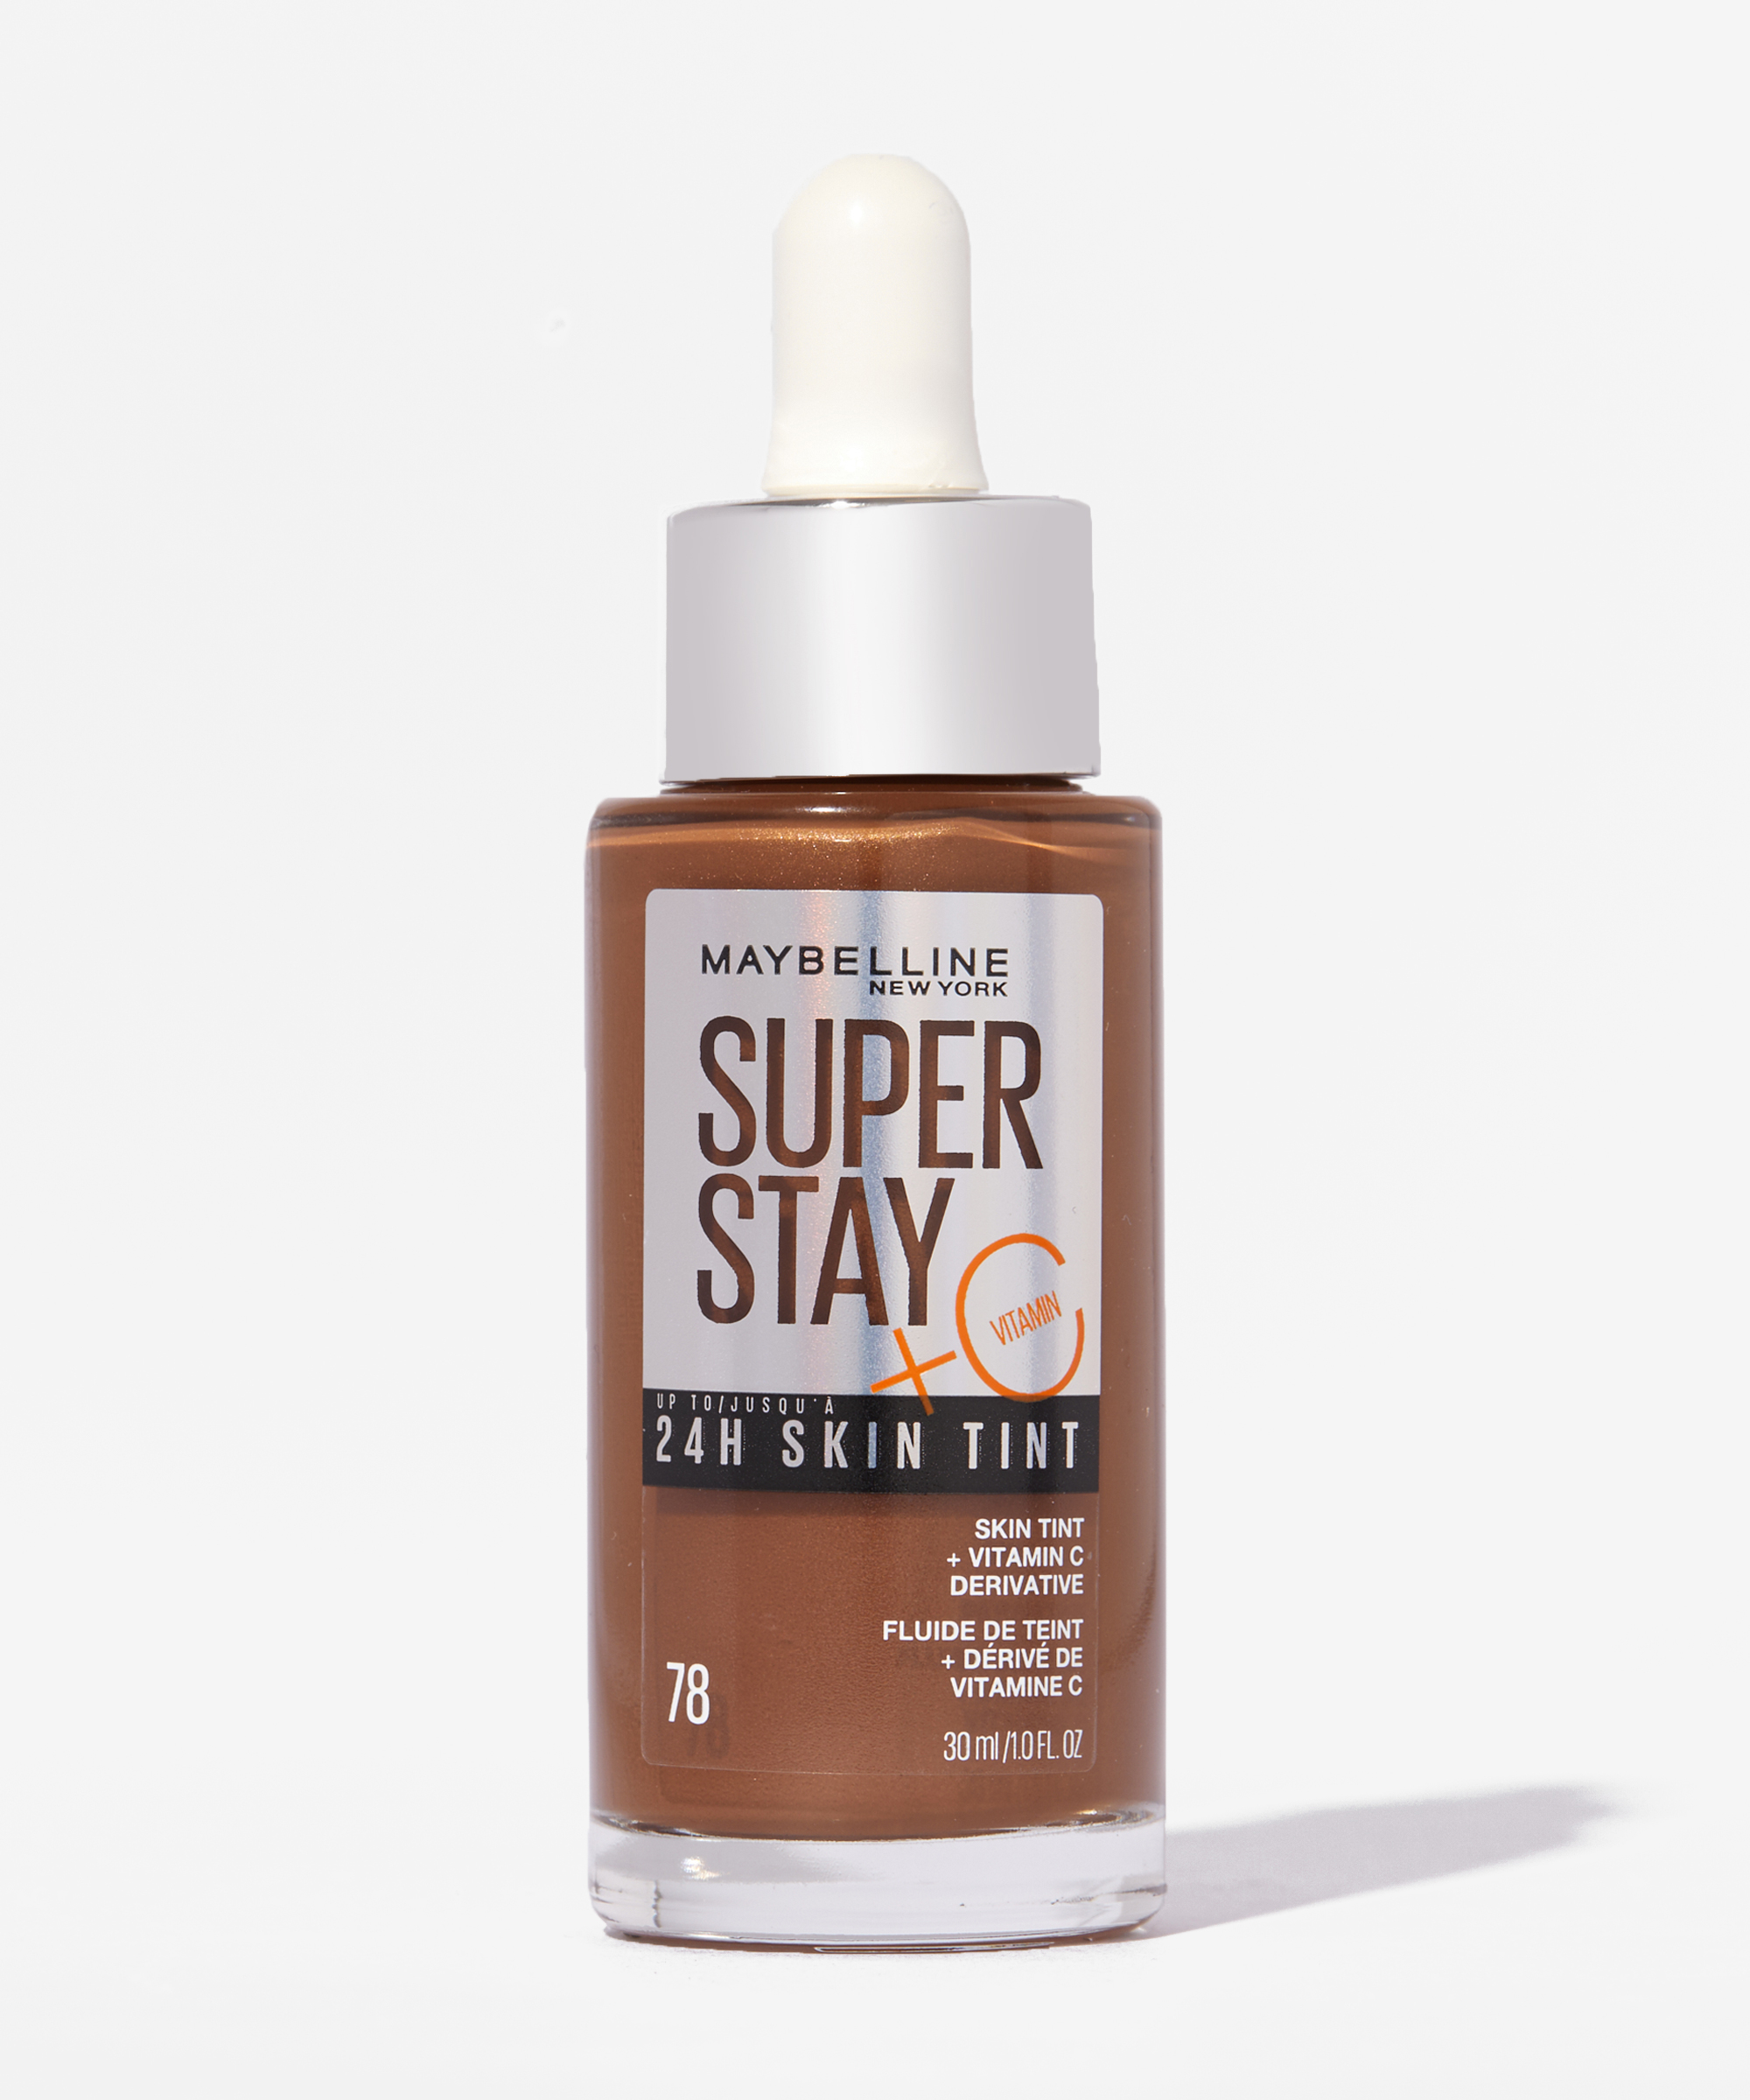 Maybelline Super Stay Up To 24H Skin Tint Foundation - 78 at BEAUTY BAY